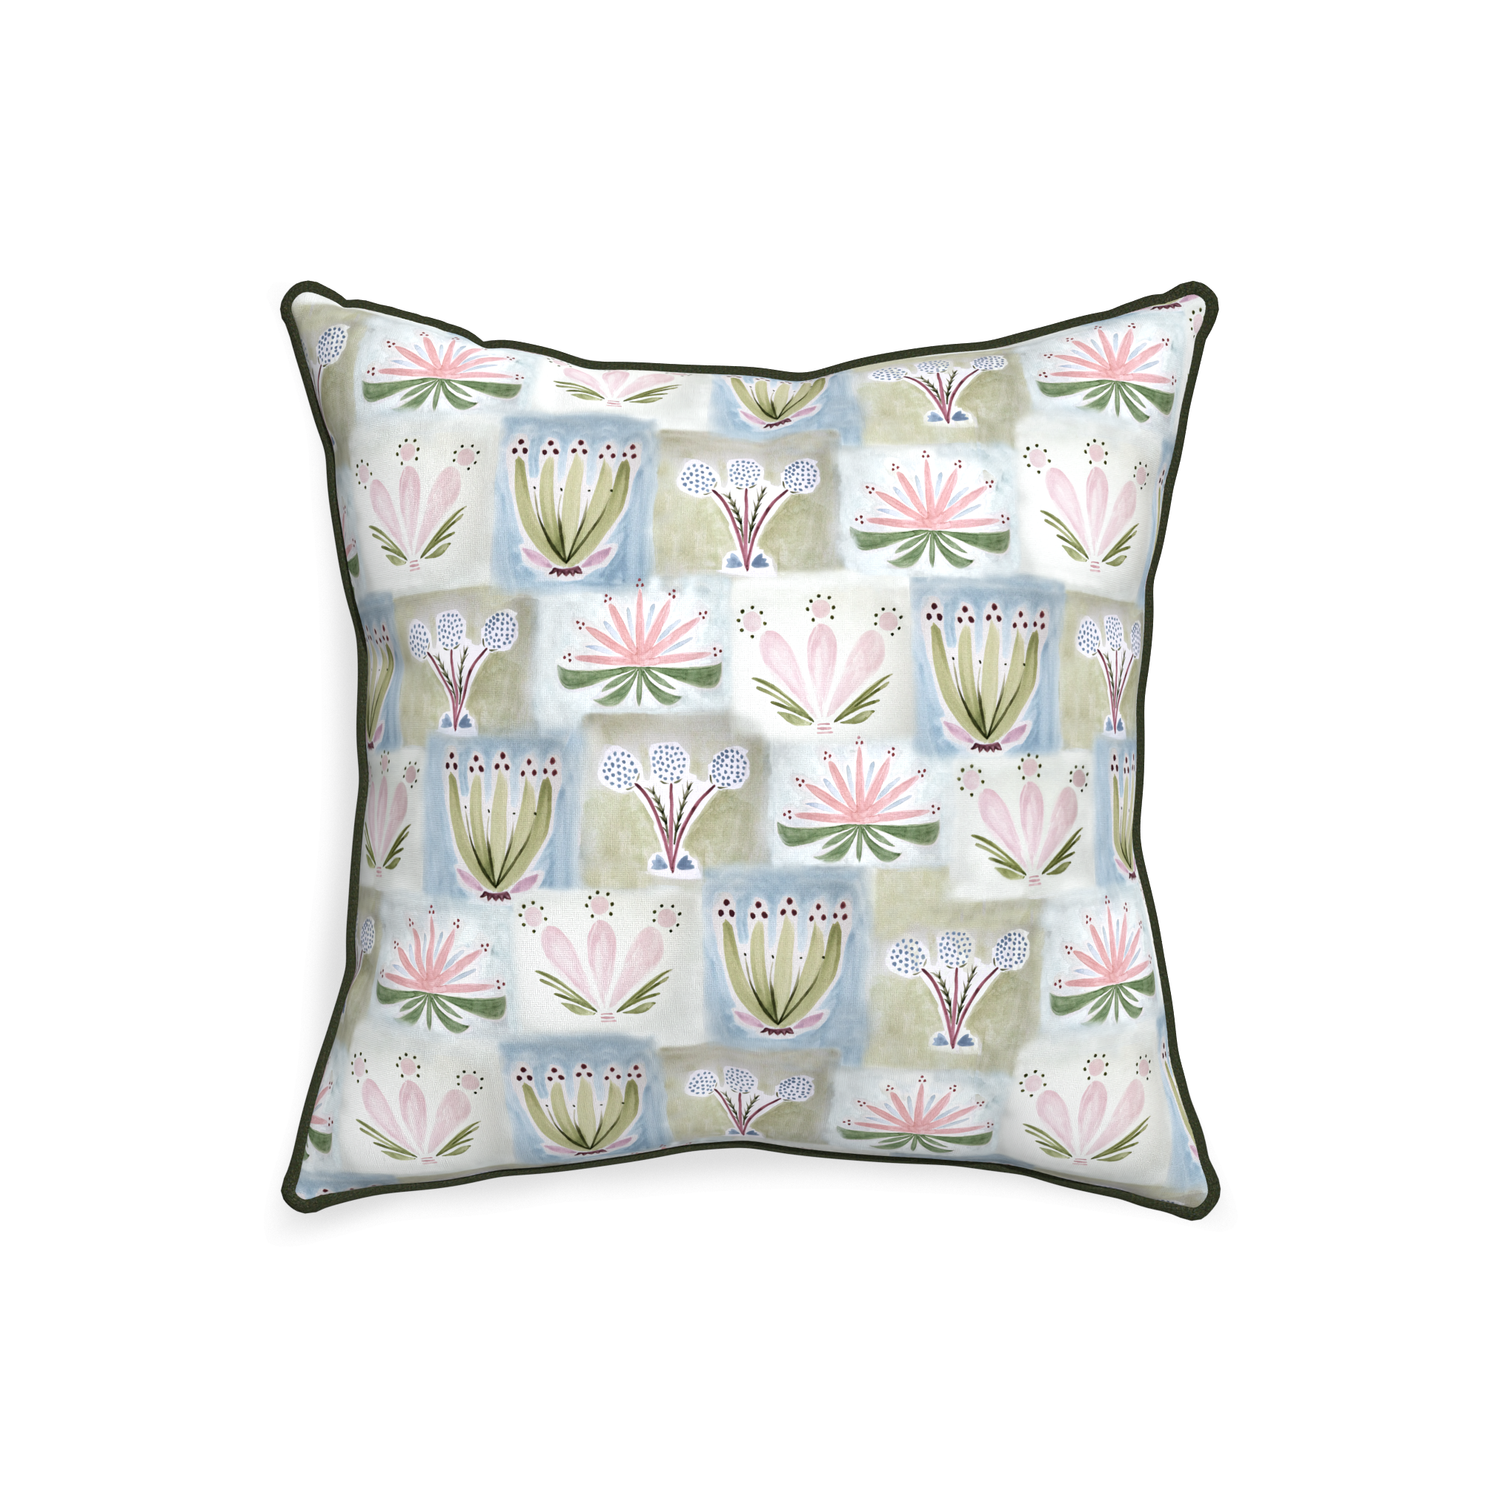 20-square harper custom hand-painted floralpillow with f piping on white background